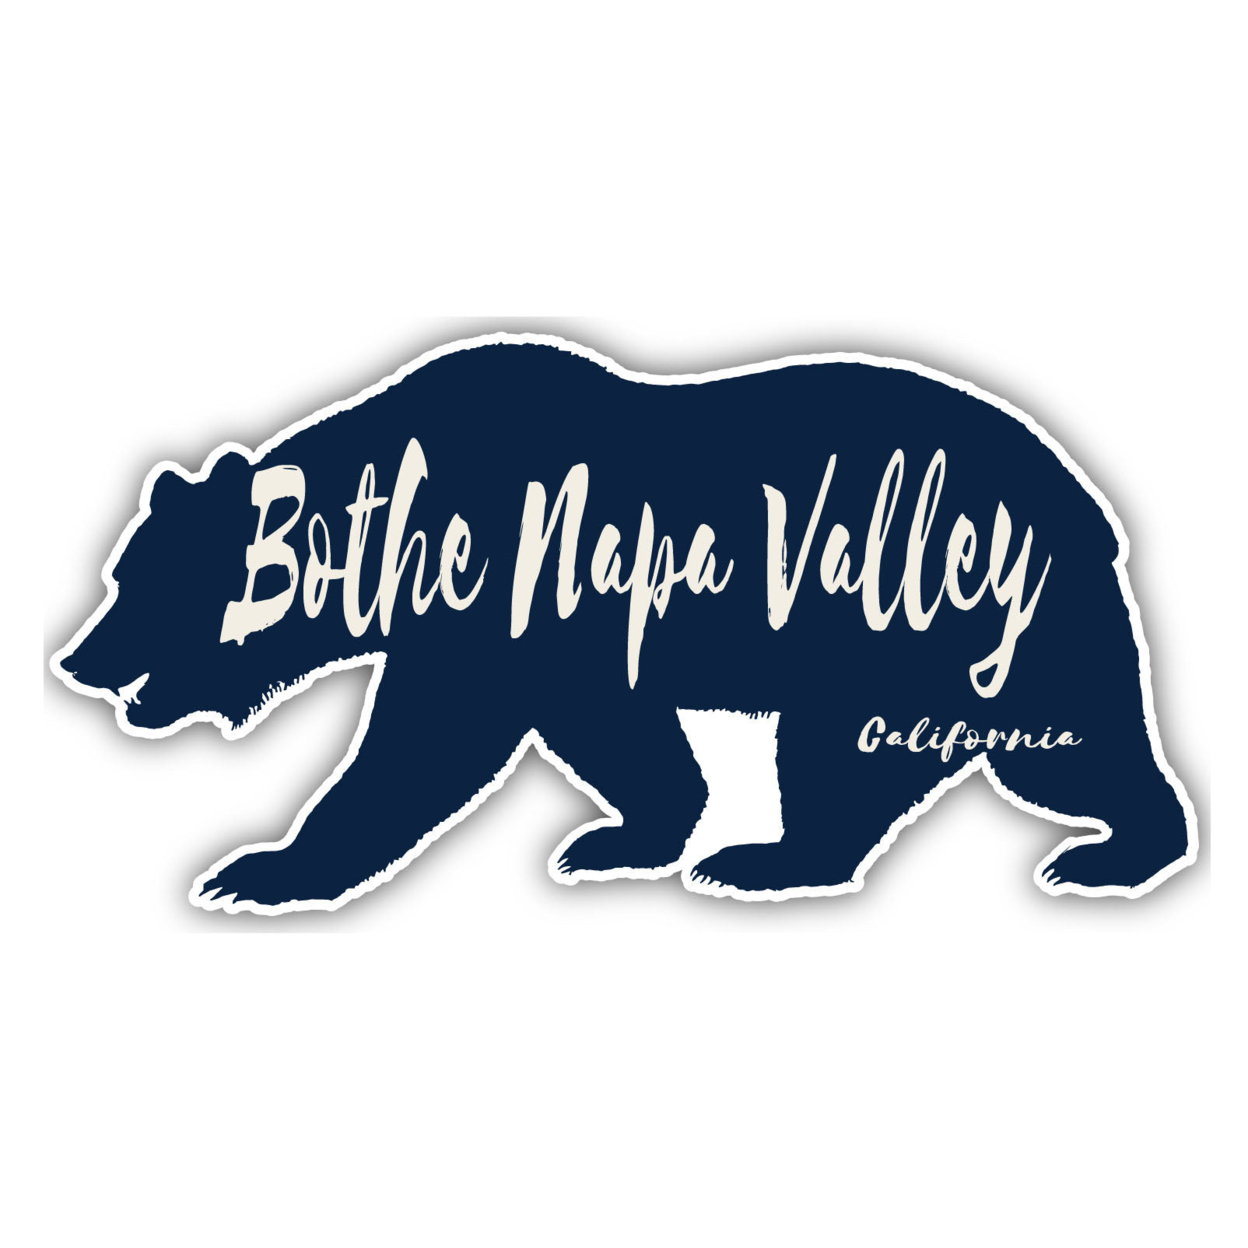 Bothe Napa Valley California Souvenir Decorative Stickers (Choose Theme And Size) - 4-Pack, 10-Inch, Bear